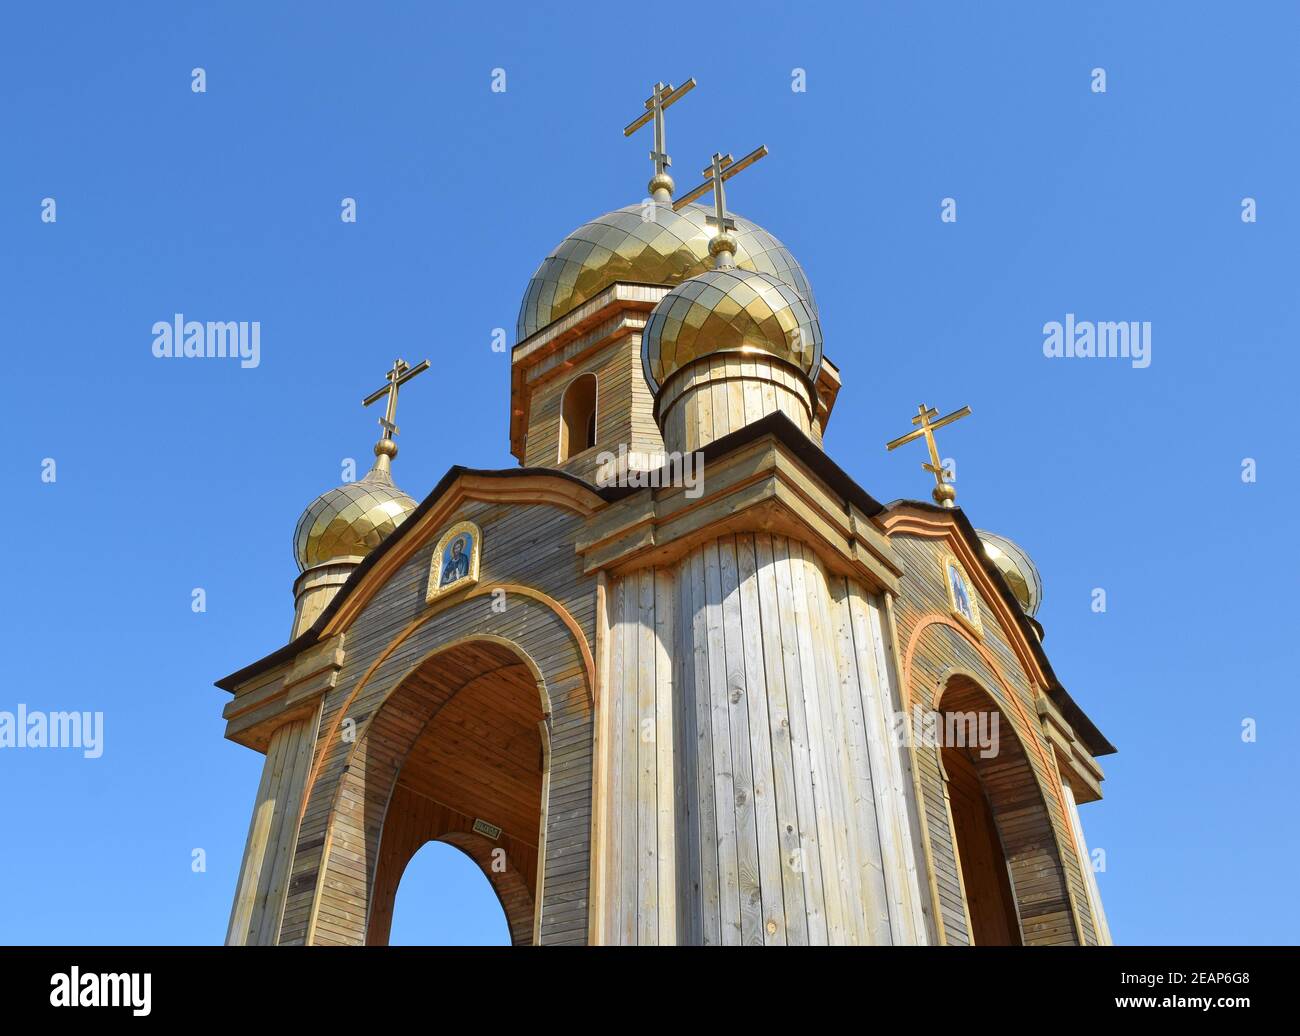 Orthodox chapel on a hill. Tabernacle in the Cossack village of Ataman Stock Photo